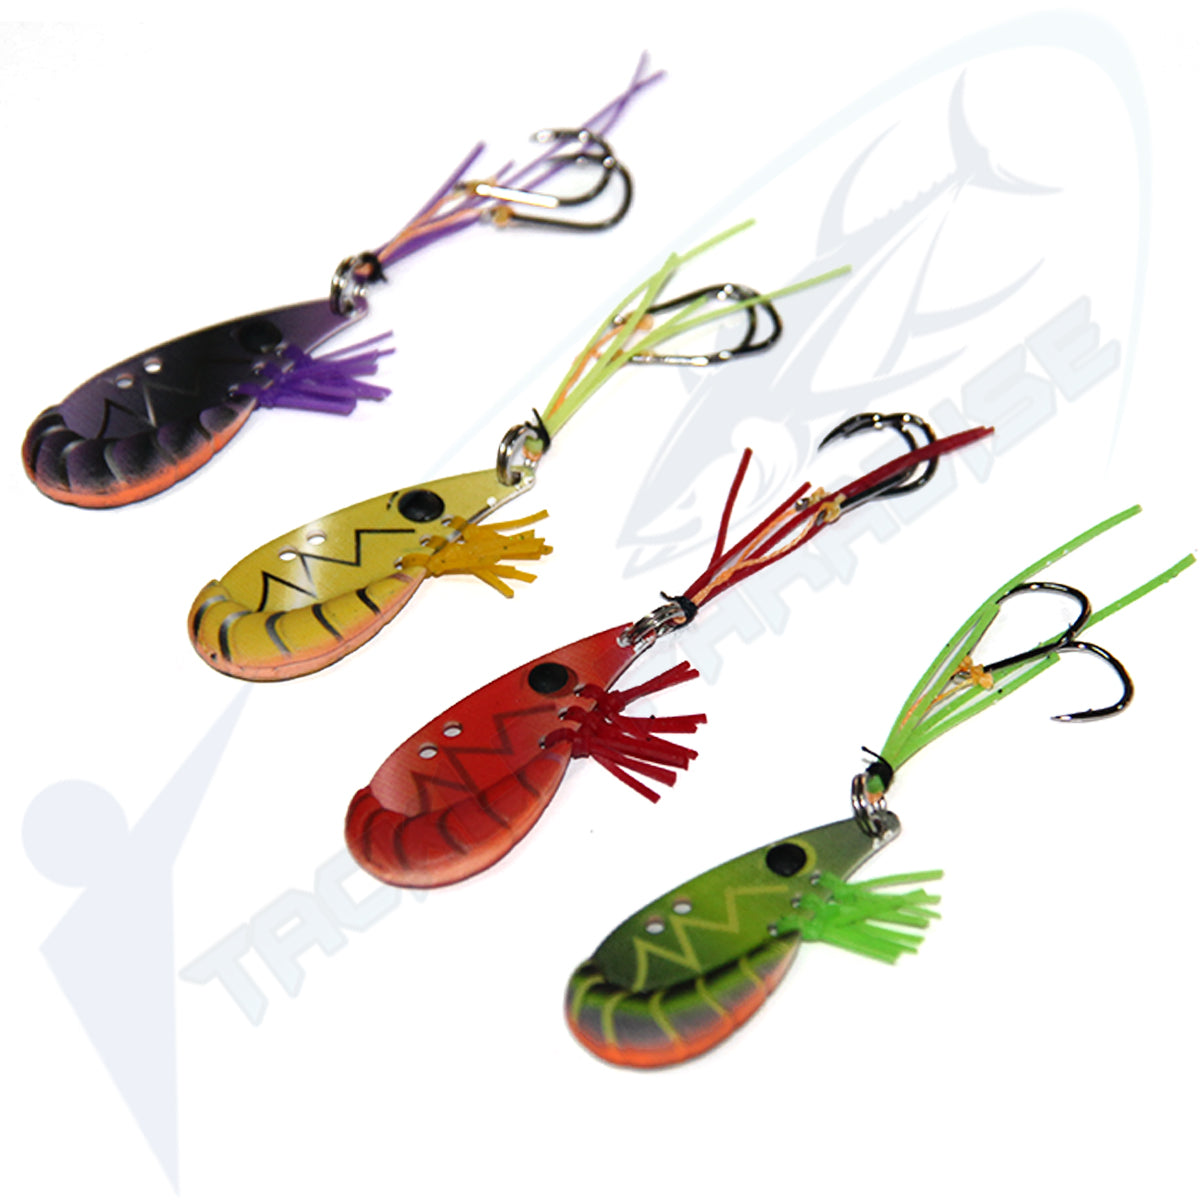 1/2oz Bassify Bass Baits COD Spinnerbaits with T-Tail Soft Plastic Grubs